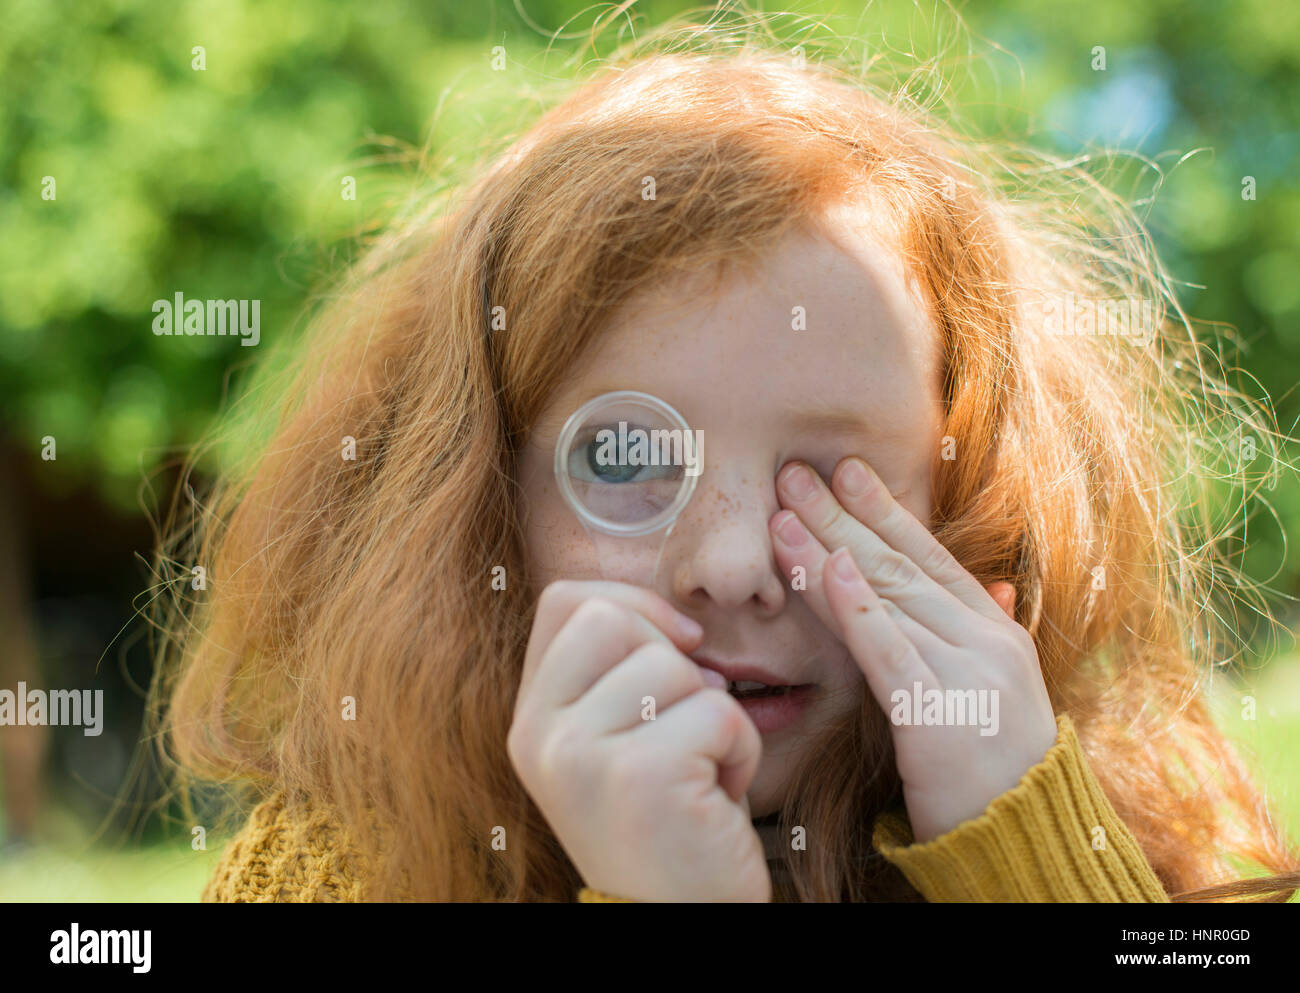 A little girl looking through a magnifying glass in her garden Stock Photo